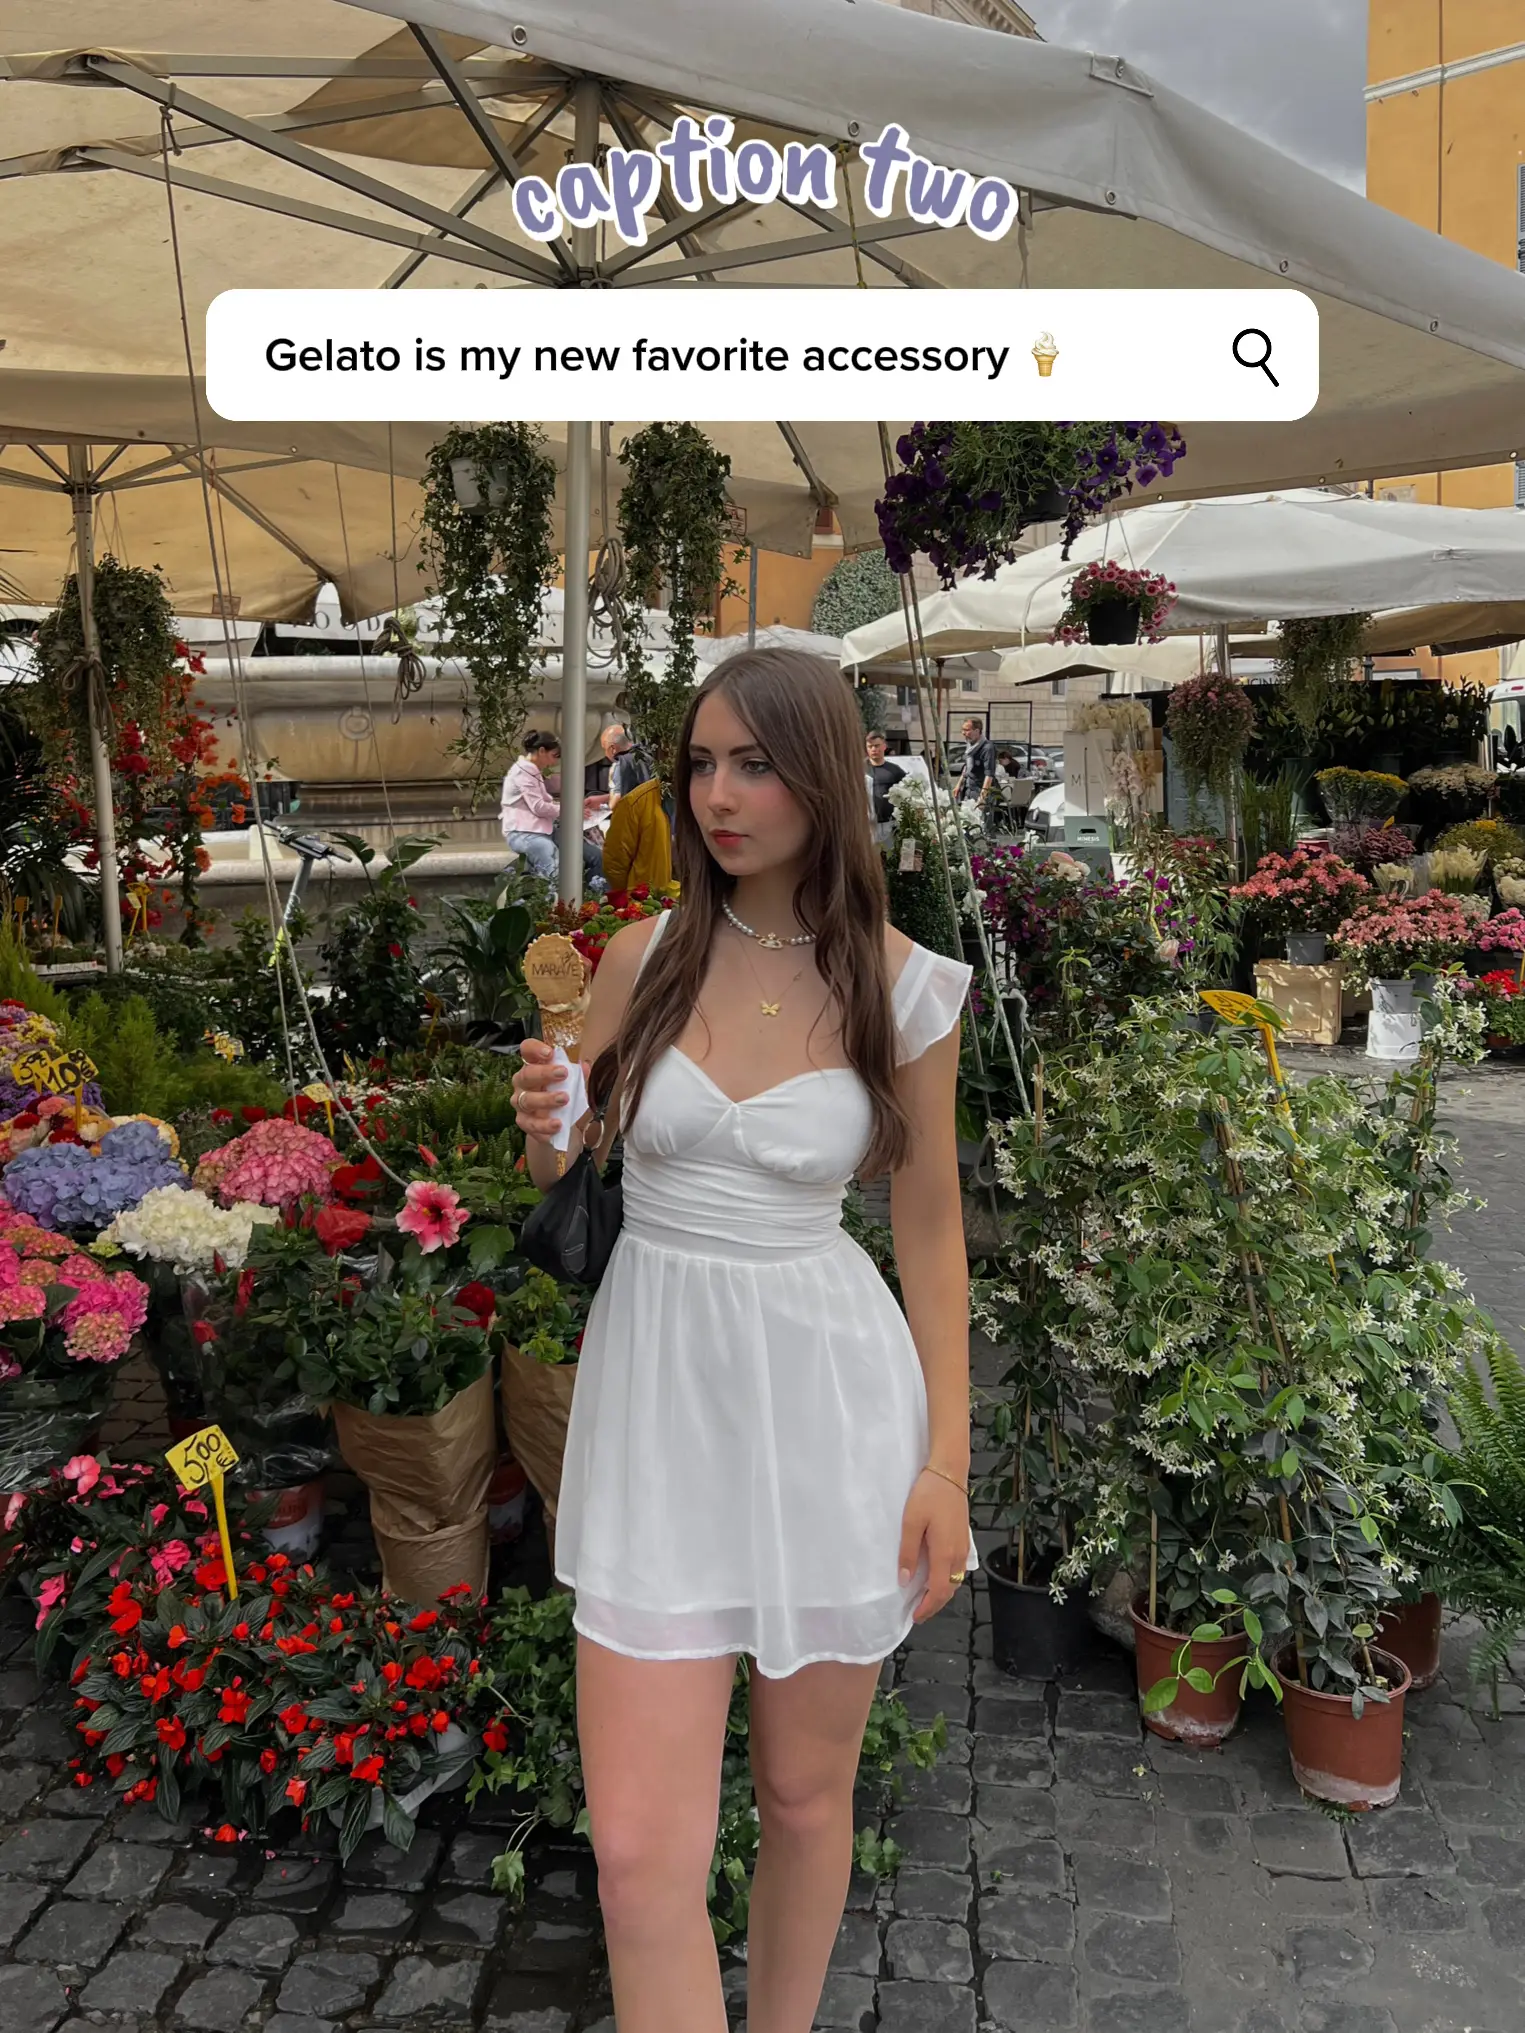  A woman in a white dress is standing in front of a flower shop. She is holding a glass of Gelato and looking at the camera. The shop is filled with flowers and vases, and there are